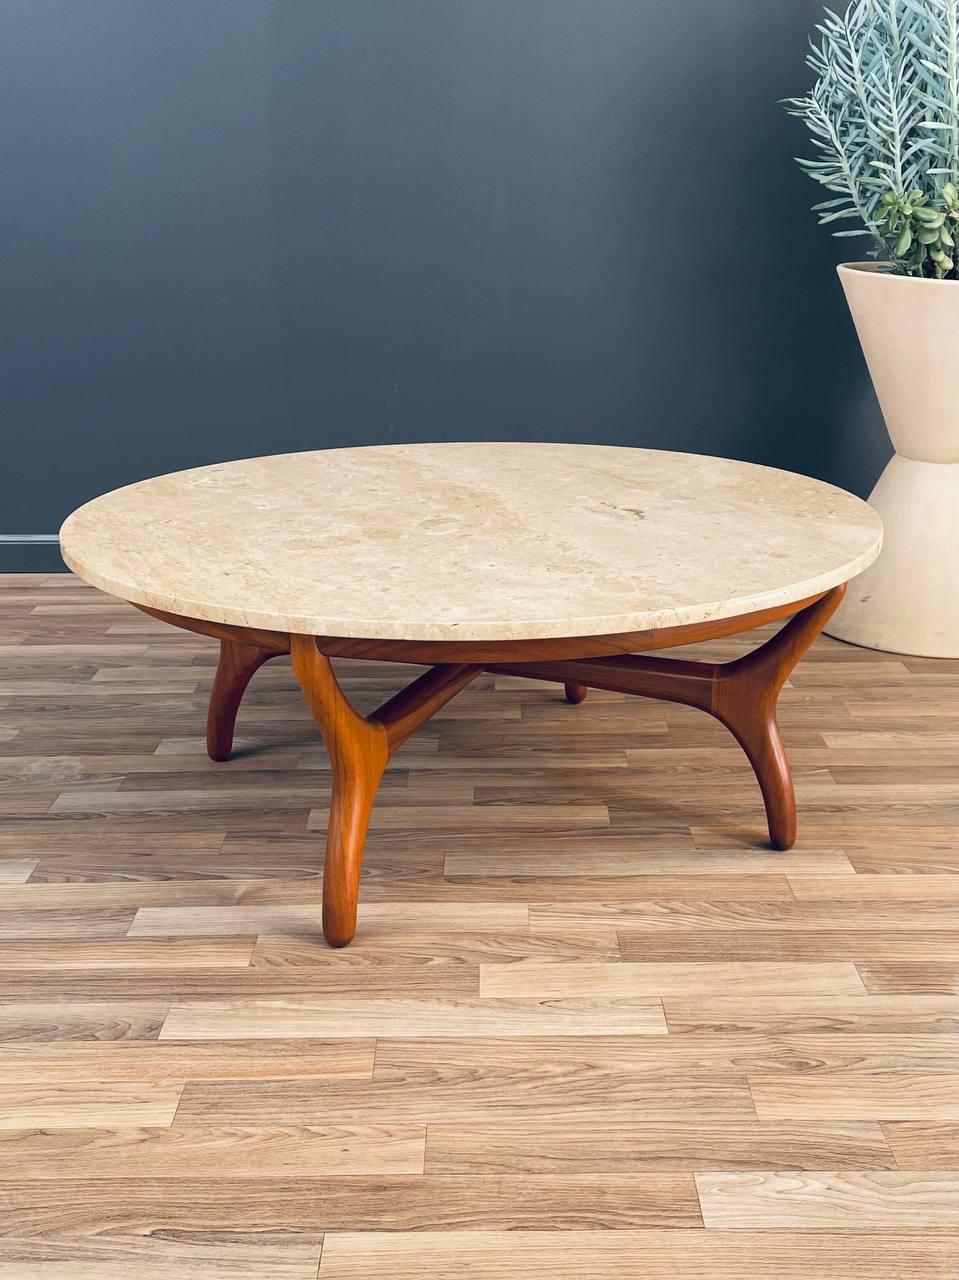 Expertly Refinished, Original Travertine Stone

With over 15 years of experience, our workshop has followed a careful process of restoration, showcasing our passion and creativity for vintage designs that can seamlessly be incorporated with many